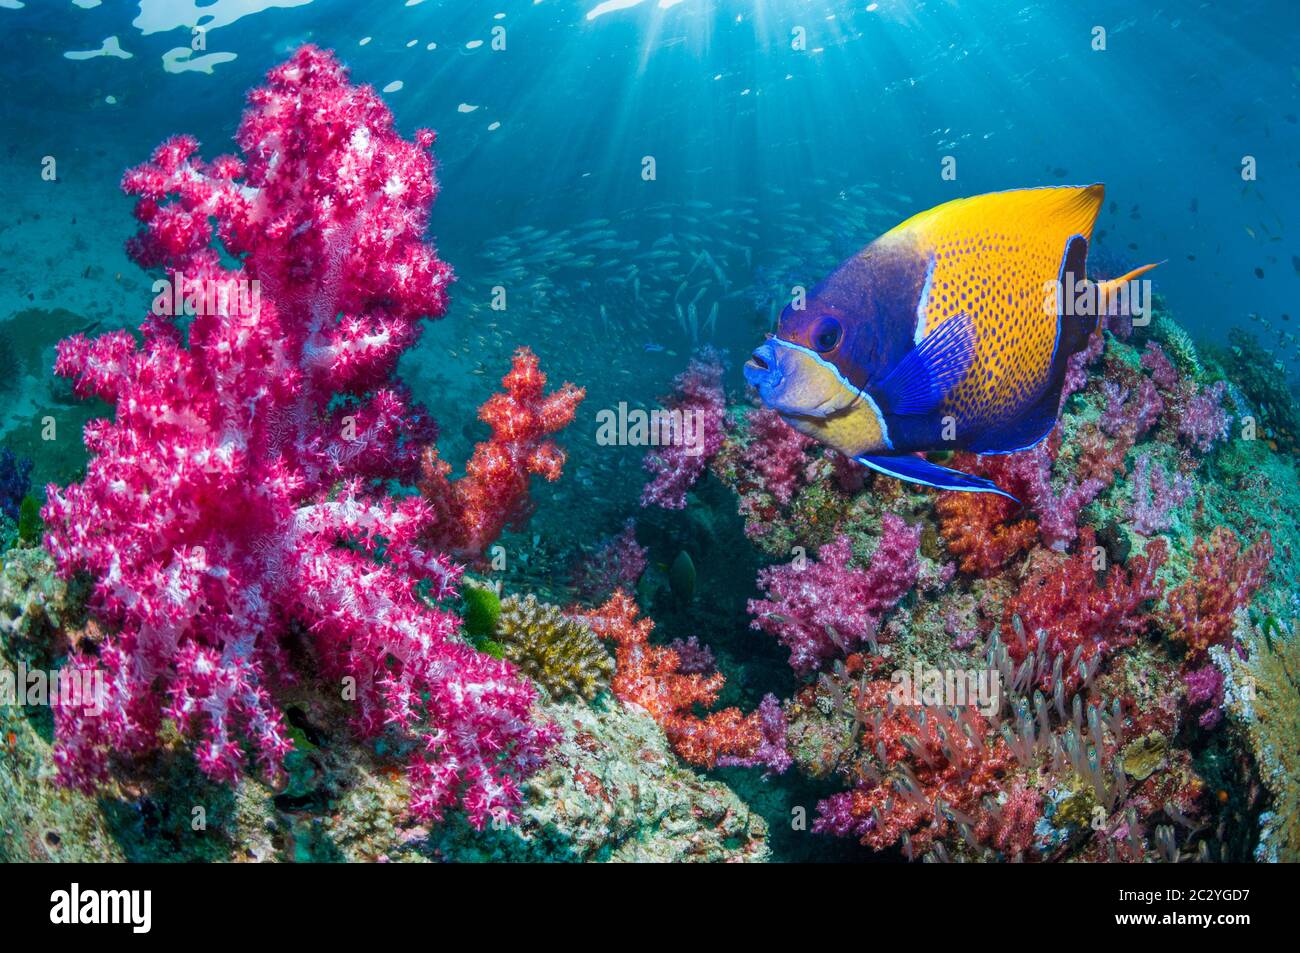 Blue-girdled angelfish [Pomacanthus navarchus] swimming over coral reef with soft corals.  Andaman Sea, Thailand. Stock Photo